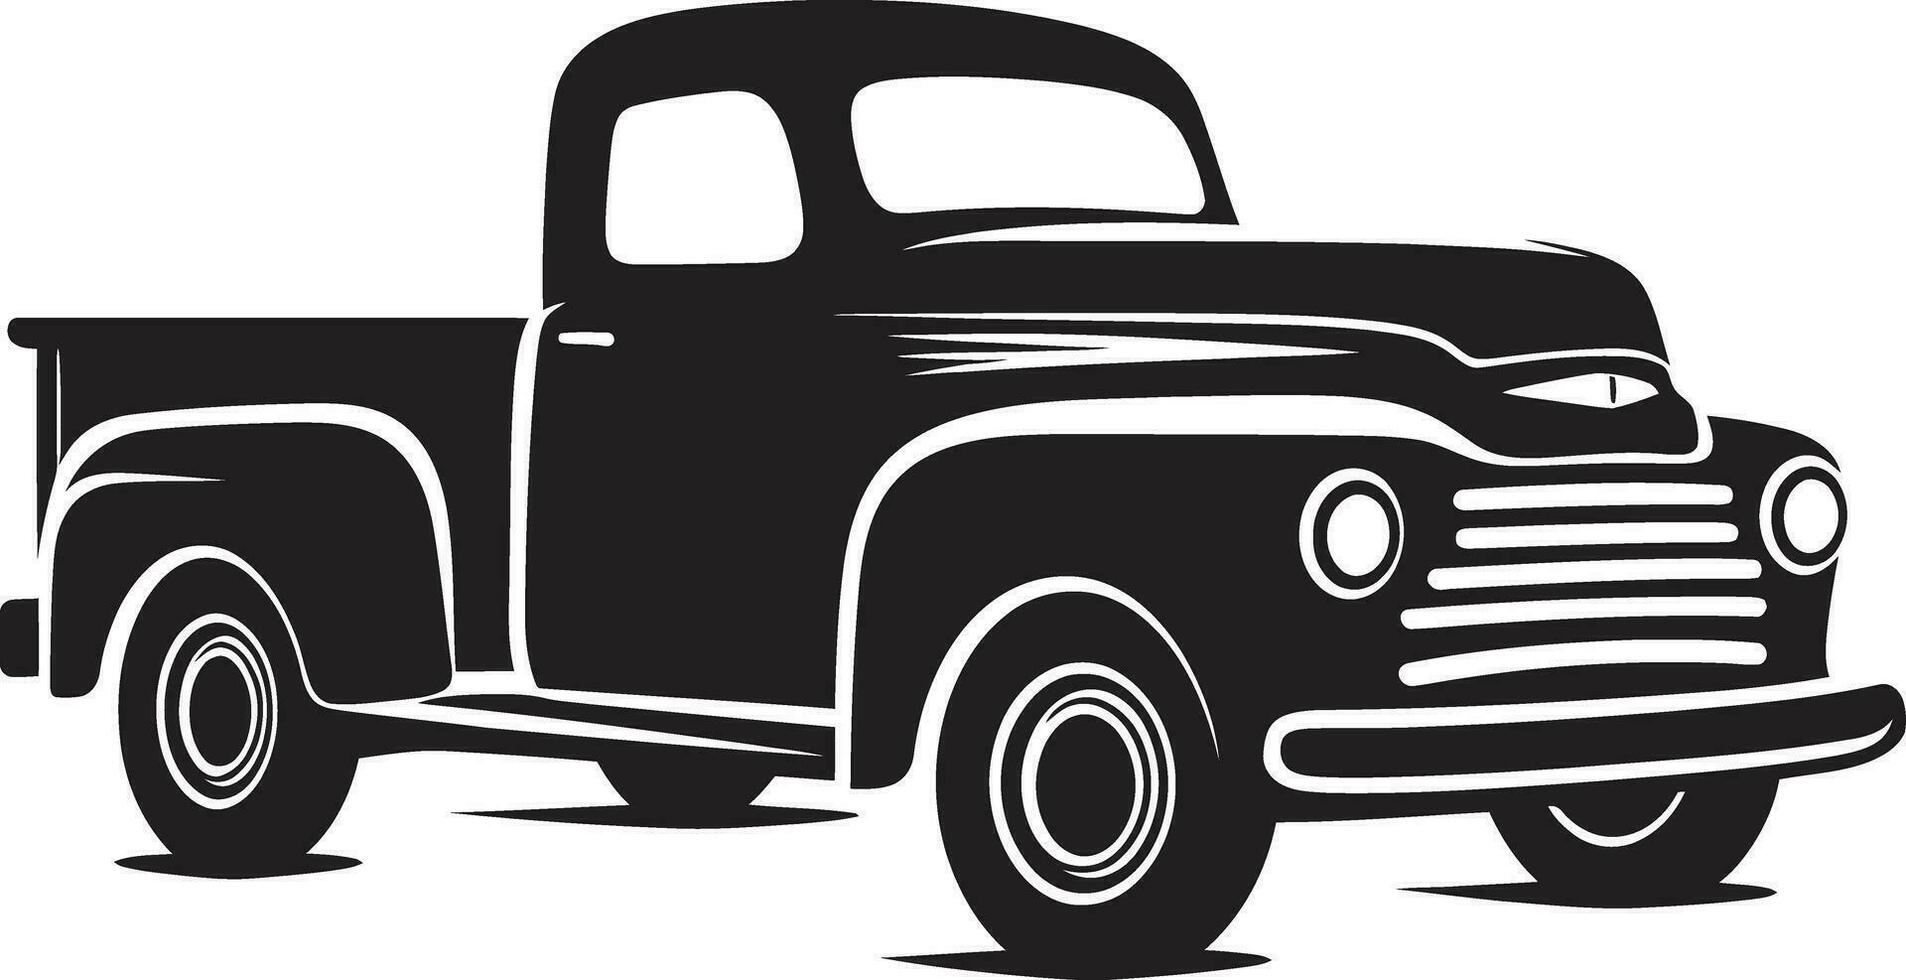 Vector Illustration of a Classic Pickup Truck Pickup Truck Vector Your Gateway to Creativity